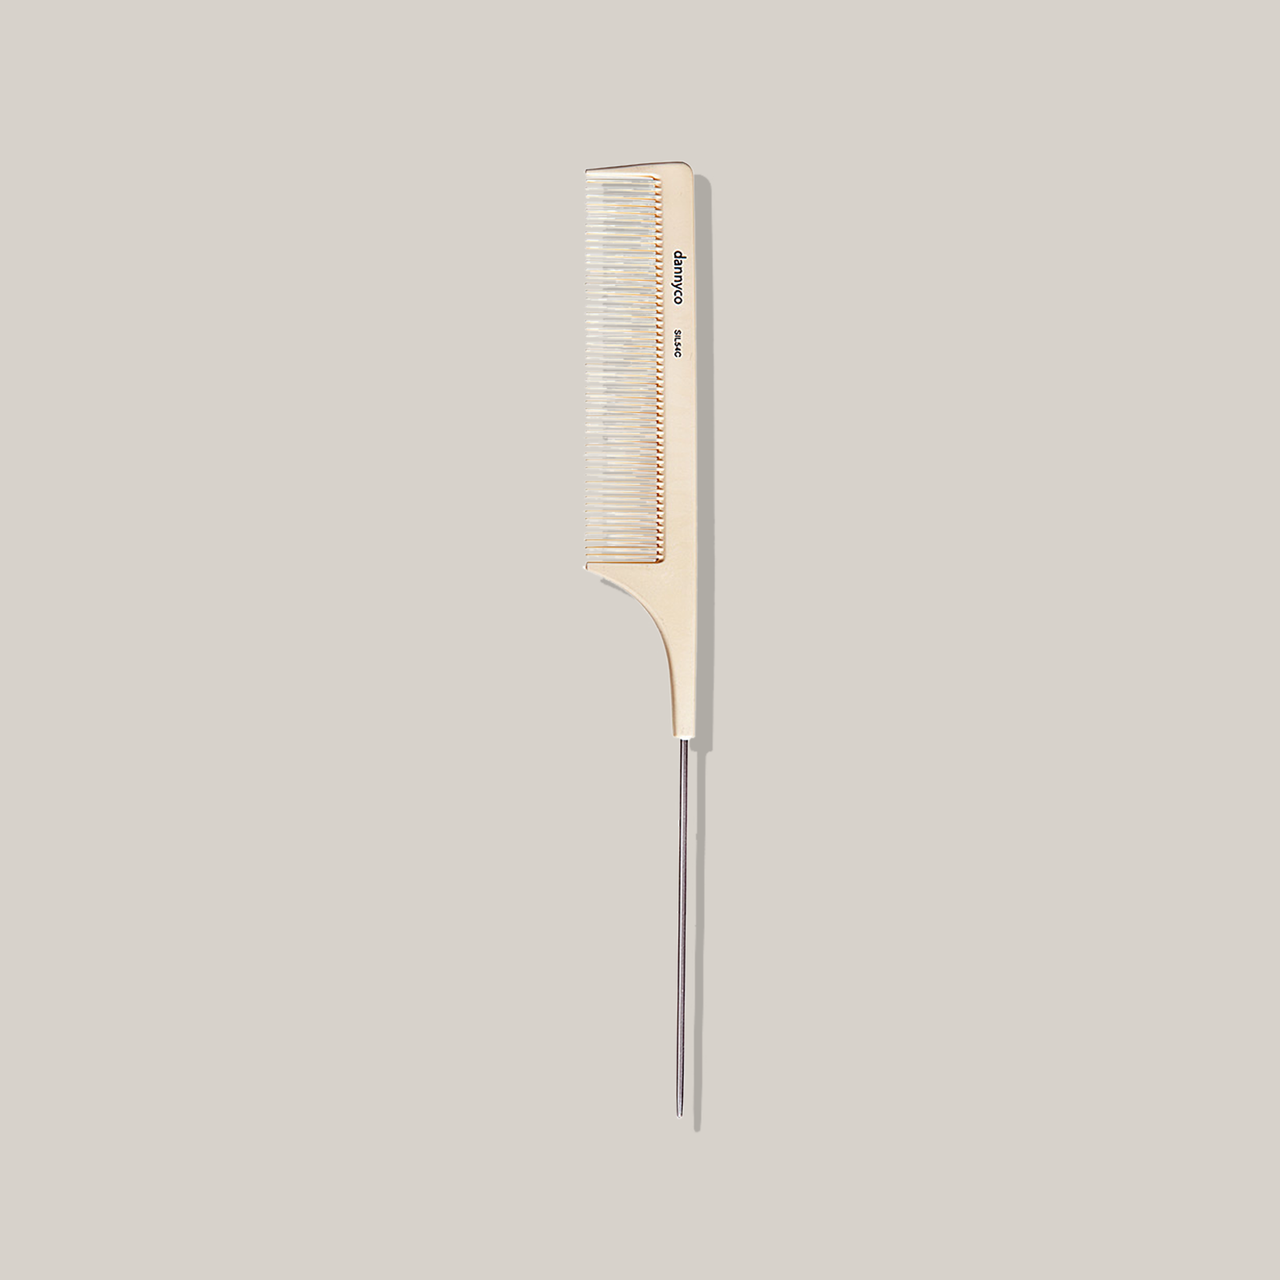 Dannyco FineTooth Silicone Tail Comb #F757/SIL54C 